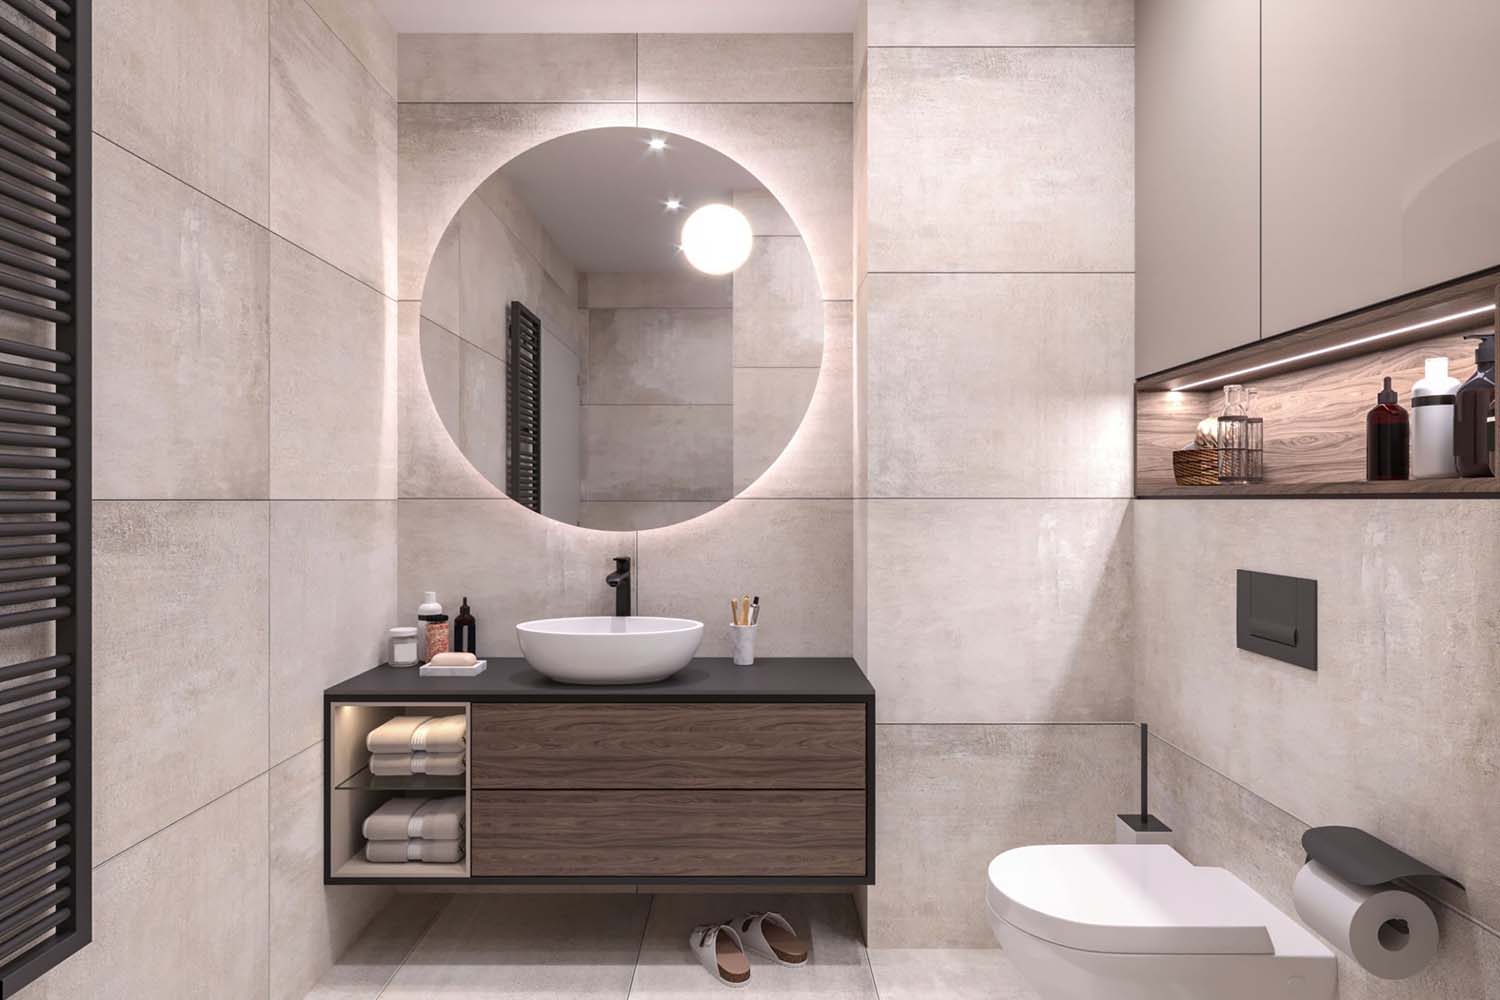 Tips and Tricks To Make a Small Bathroom Feel Bigger